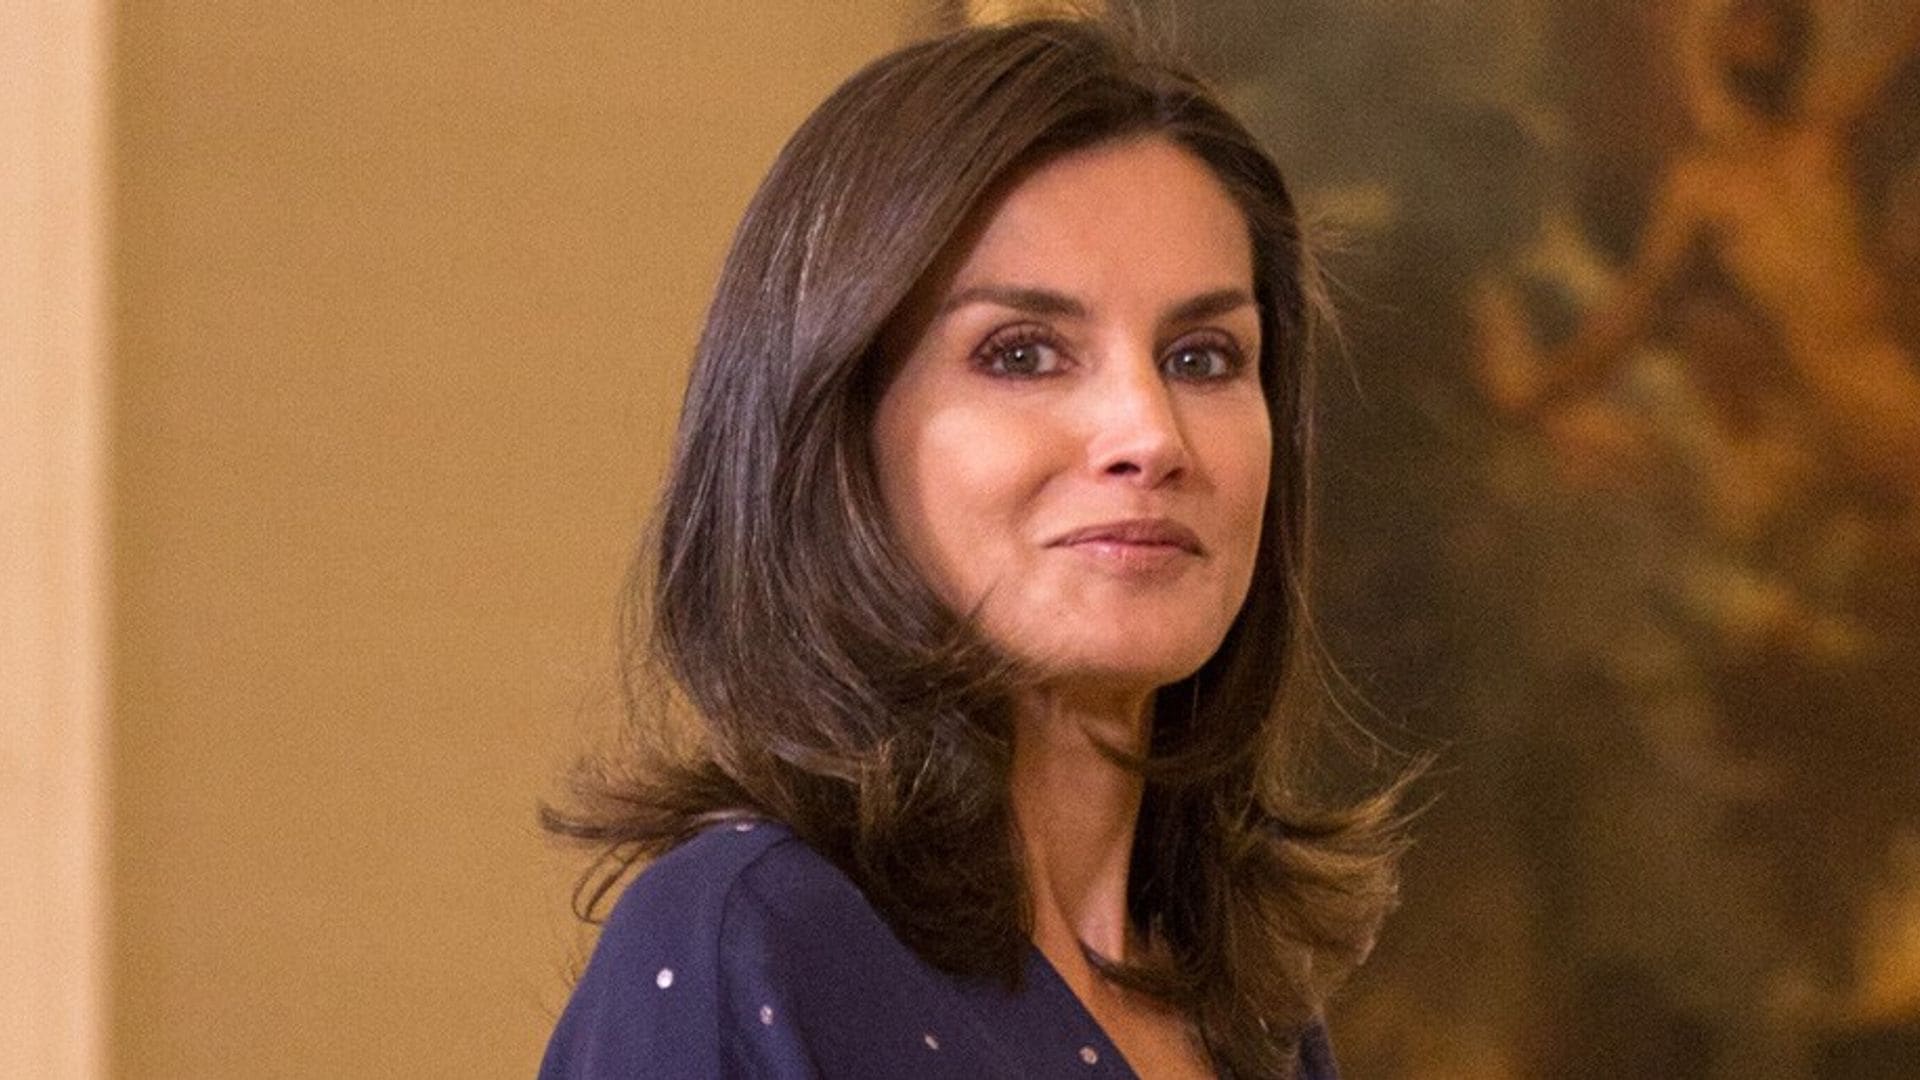 Queen Letizia shows off toned legs as she returns to royal duties in Madrid